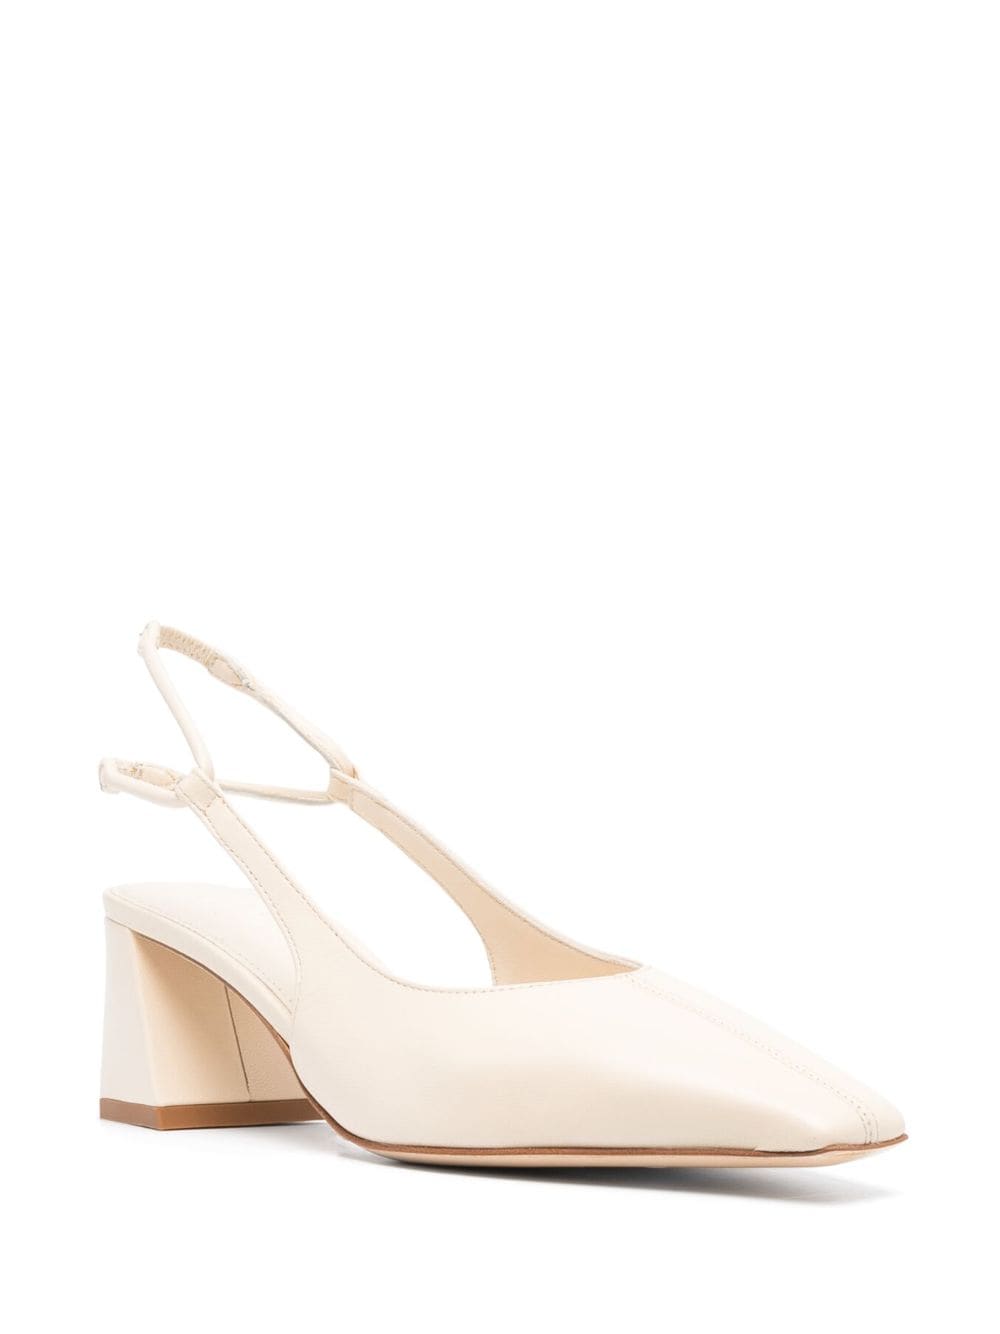 Aeyde Polly Leather Slingback Pumps - Farfetch